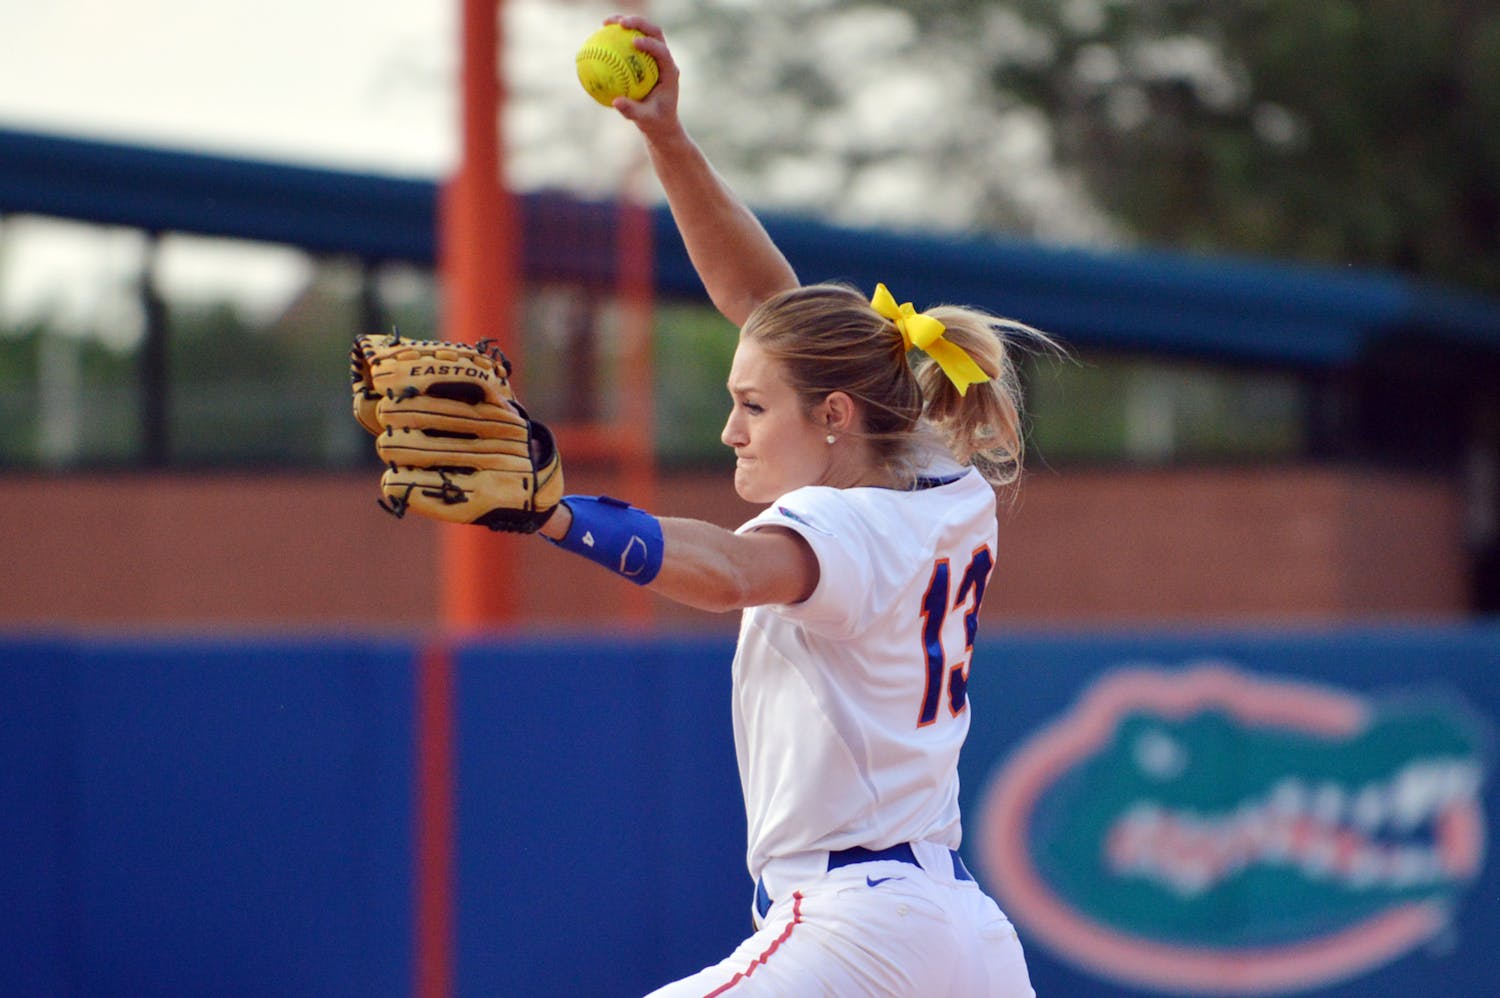 Hannah Rogers pitches during UF's 17-1 win against USF on April 23 at Katie Seashole Pressly Stadium. Rogers was named the 2014 Southeastern Conference Female Athlete of the Year and finished her senior season with a 30-8 record and a 1.60 ERA.